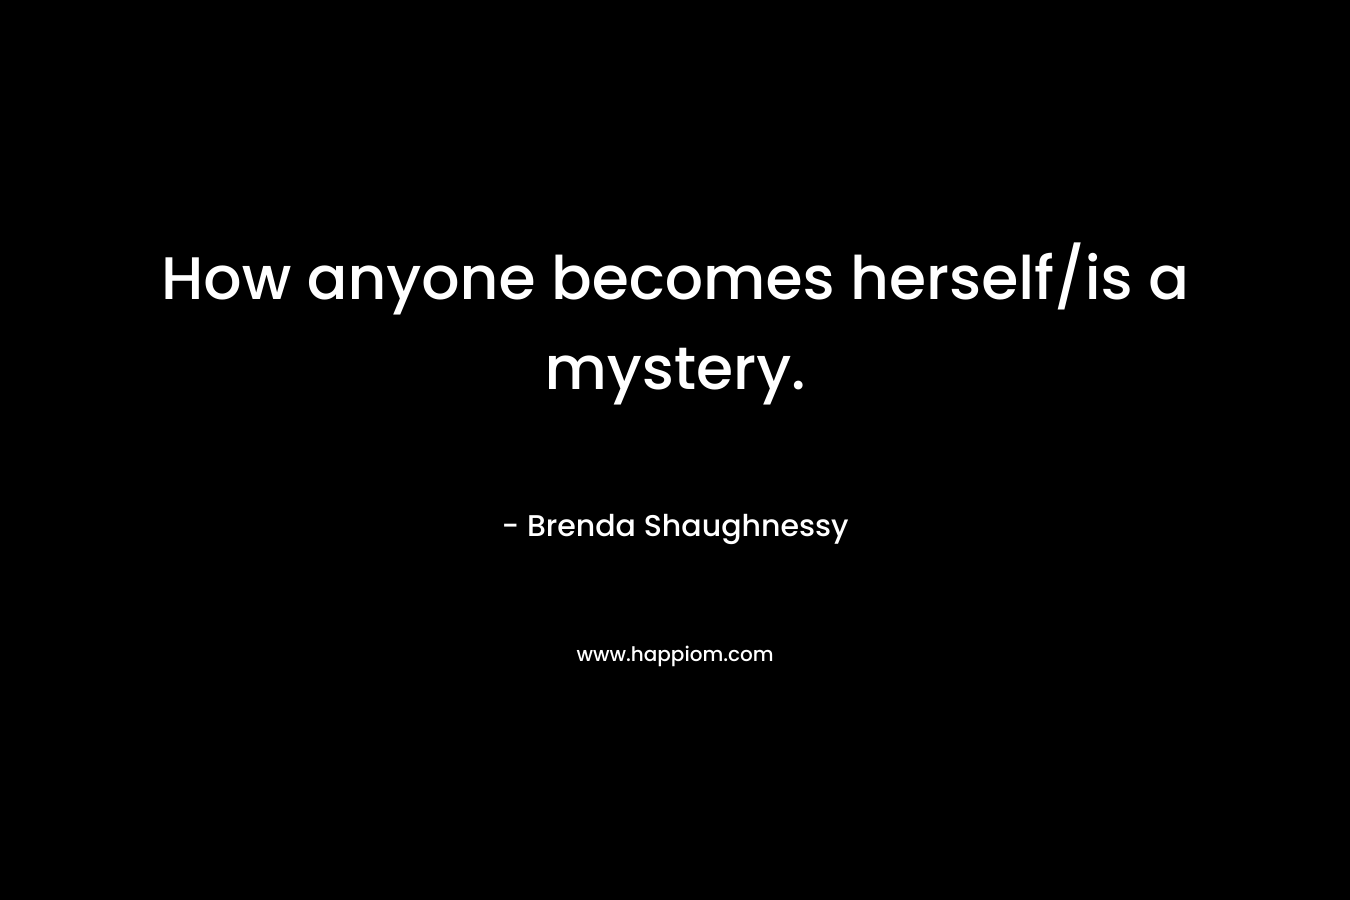 How anyone becomes herself/is a mystery.